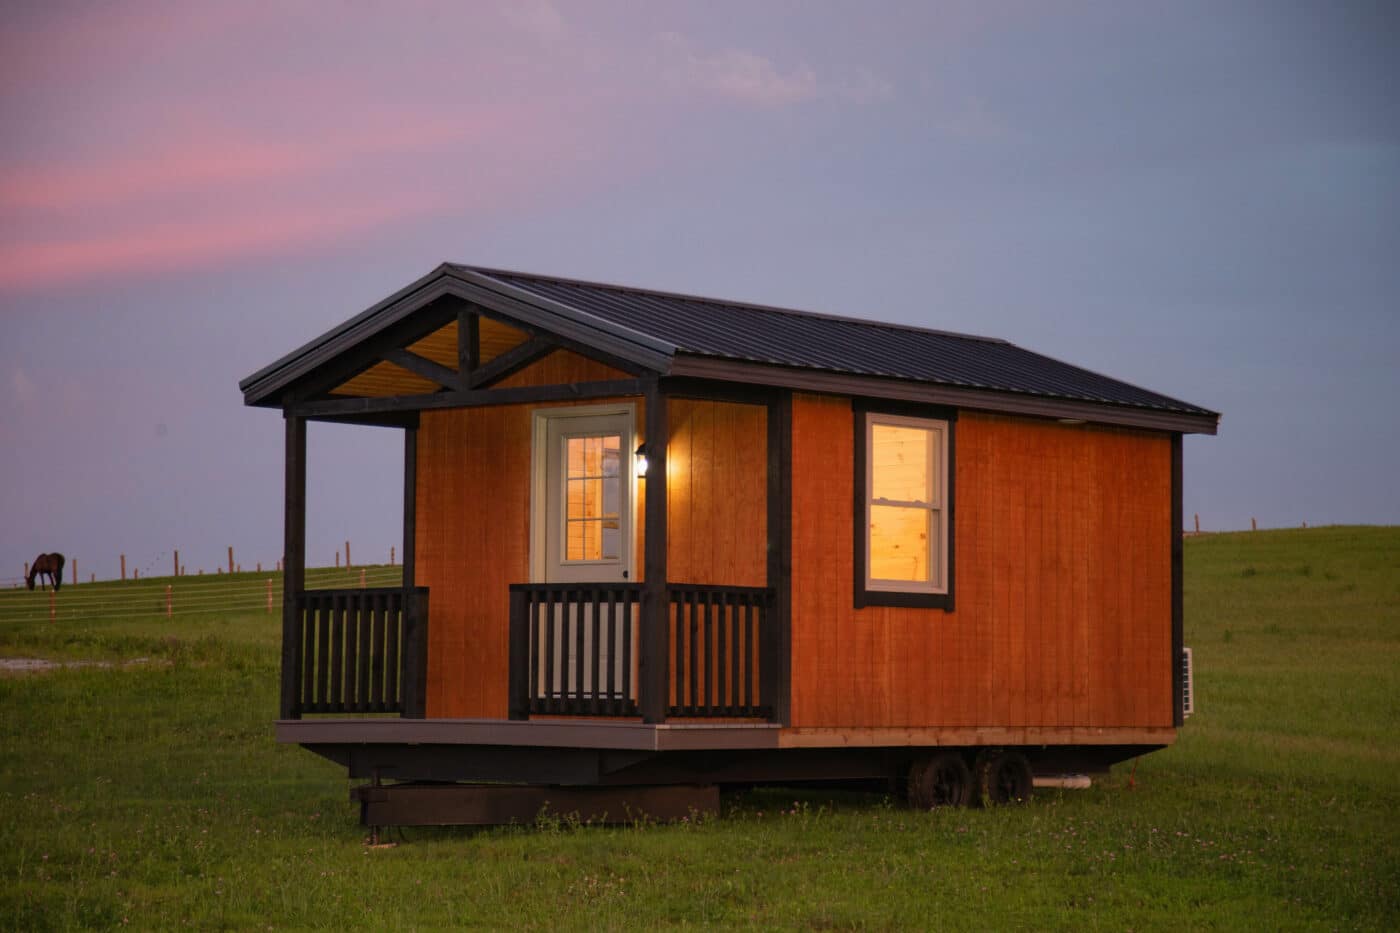 Why The Tiny Home Industry Is Booming: 5 Factors Driving Growth 1